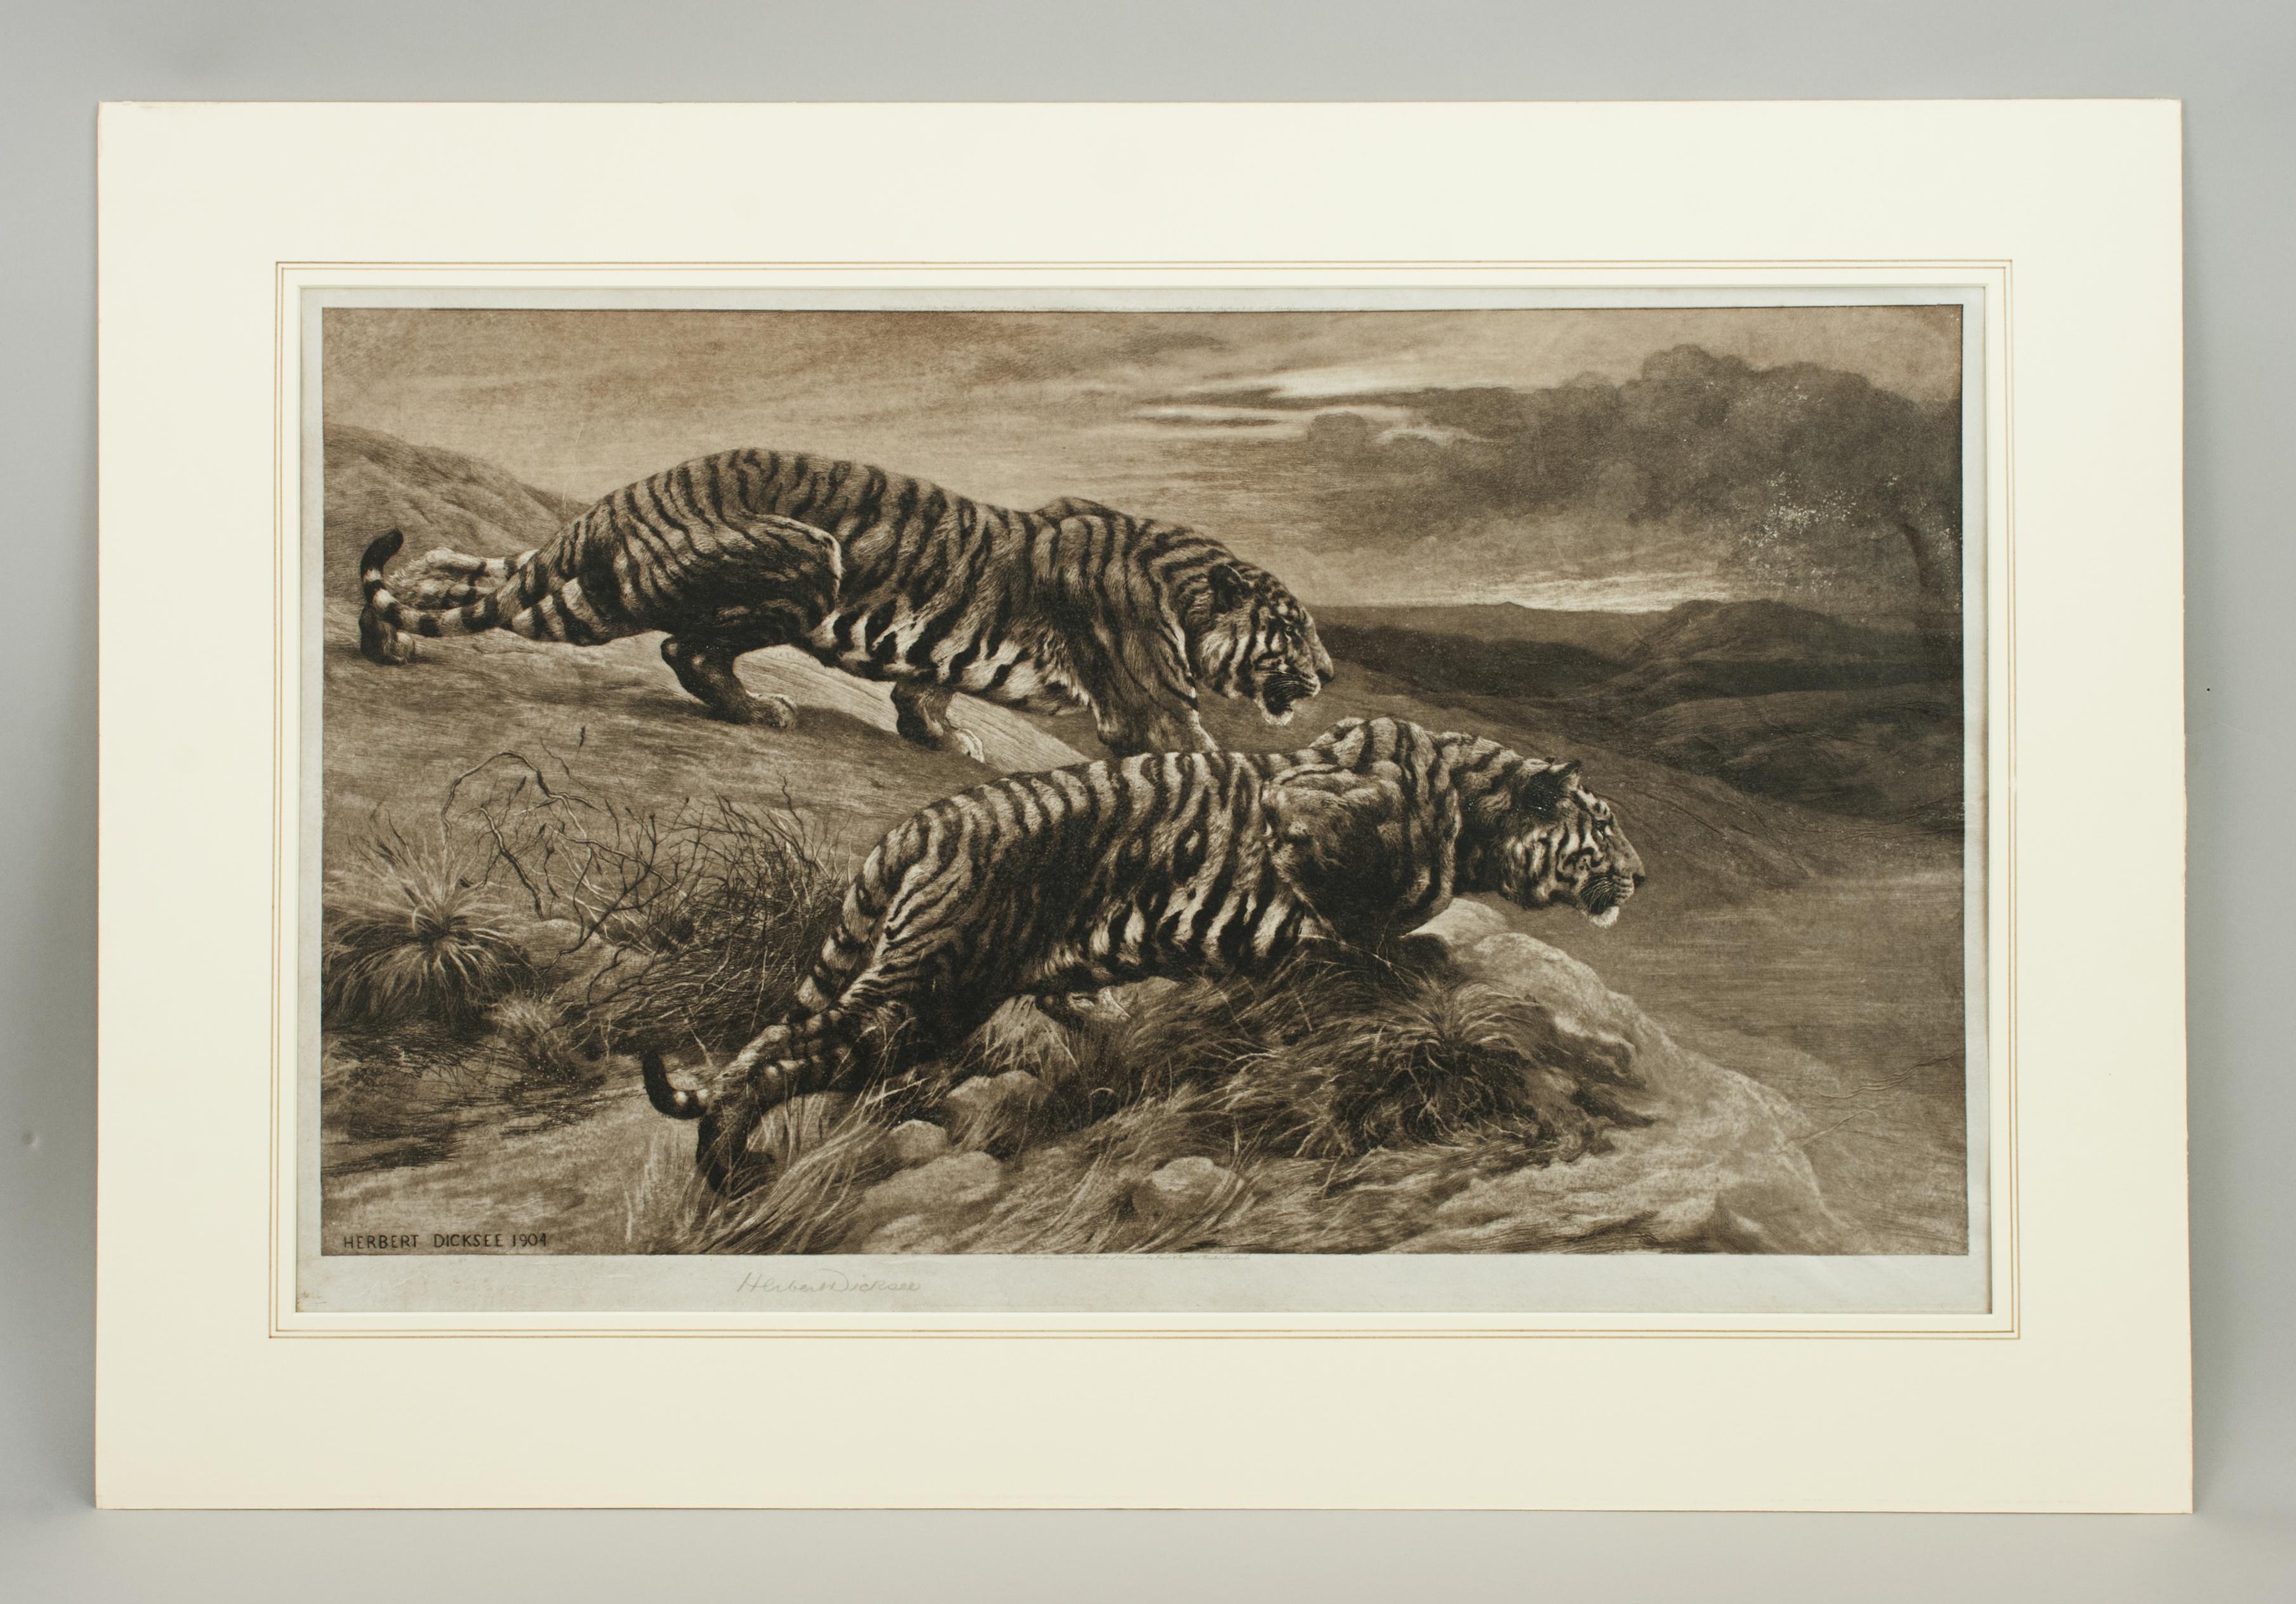 Tiger rtching by Herbert Dicksee, the Destroyers
A very strong black and white wildlife picture of a pair of Tigers crouching on some rocks overlooking the open grassland below. The powerful etching is by Herbert Thomas Dicksee, published September